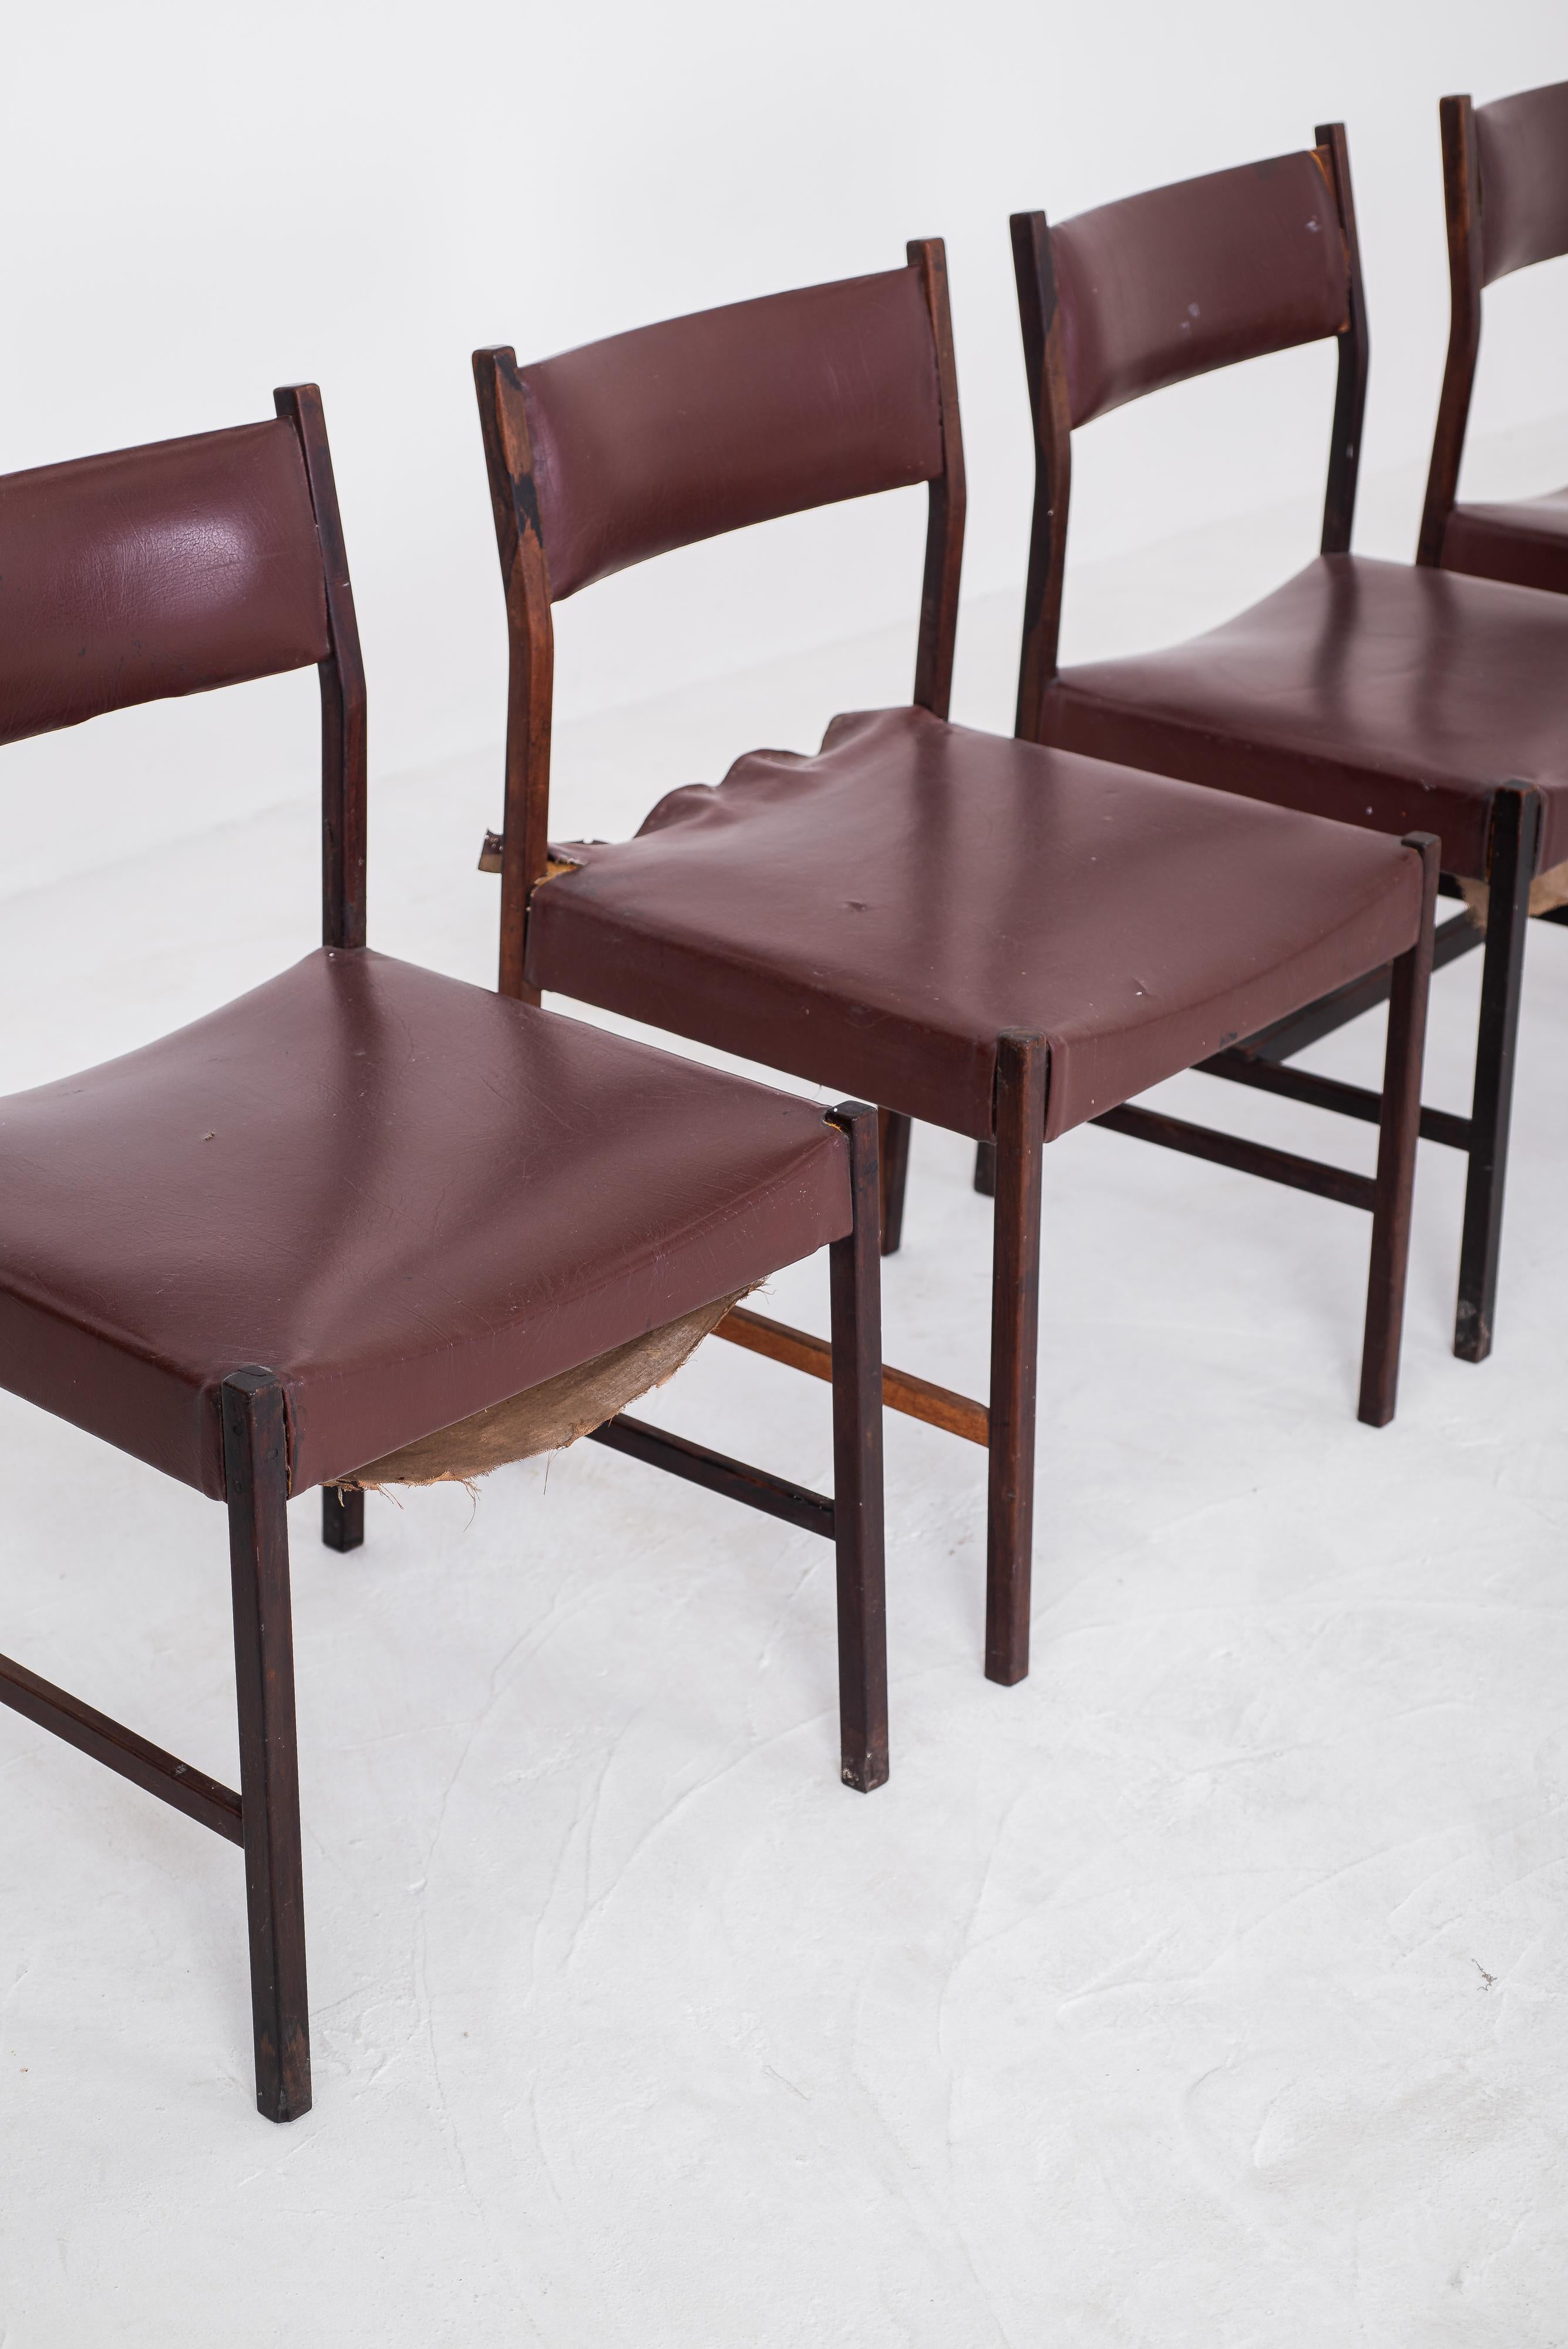 Brazilian Set of 7 Itamaraty Dining Chairs in Original Condition By Jorge Zalszupin, 1959 For Sale